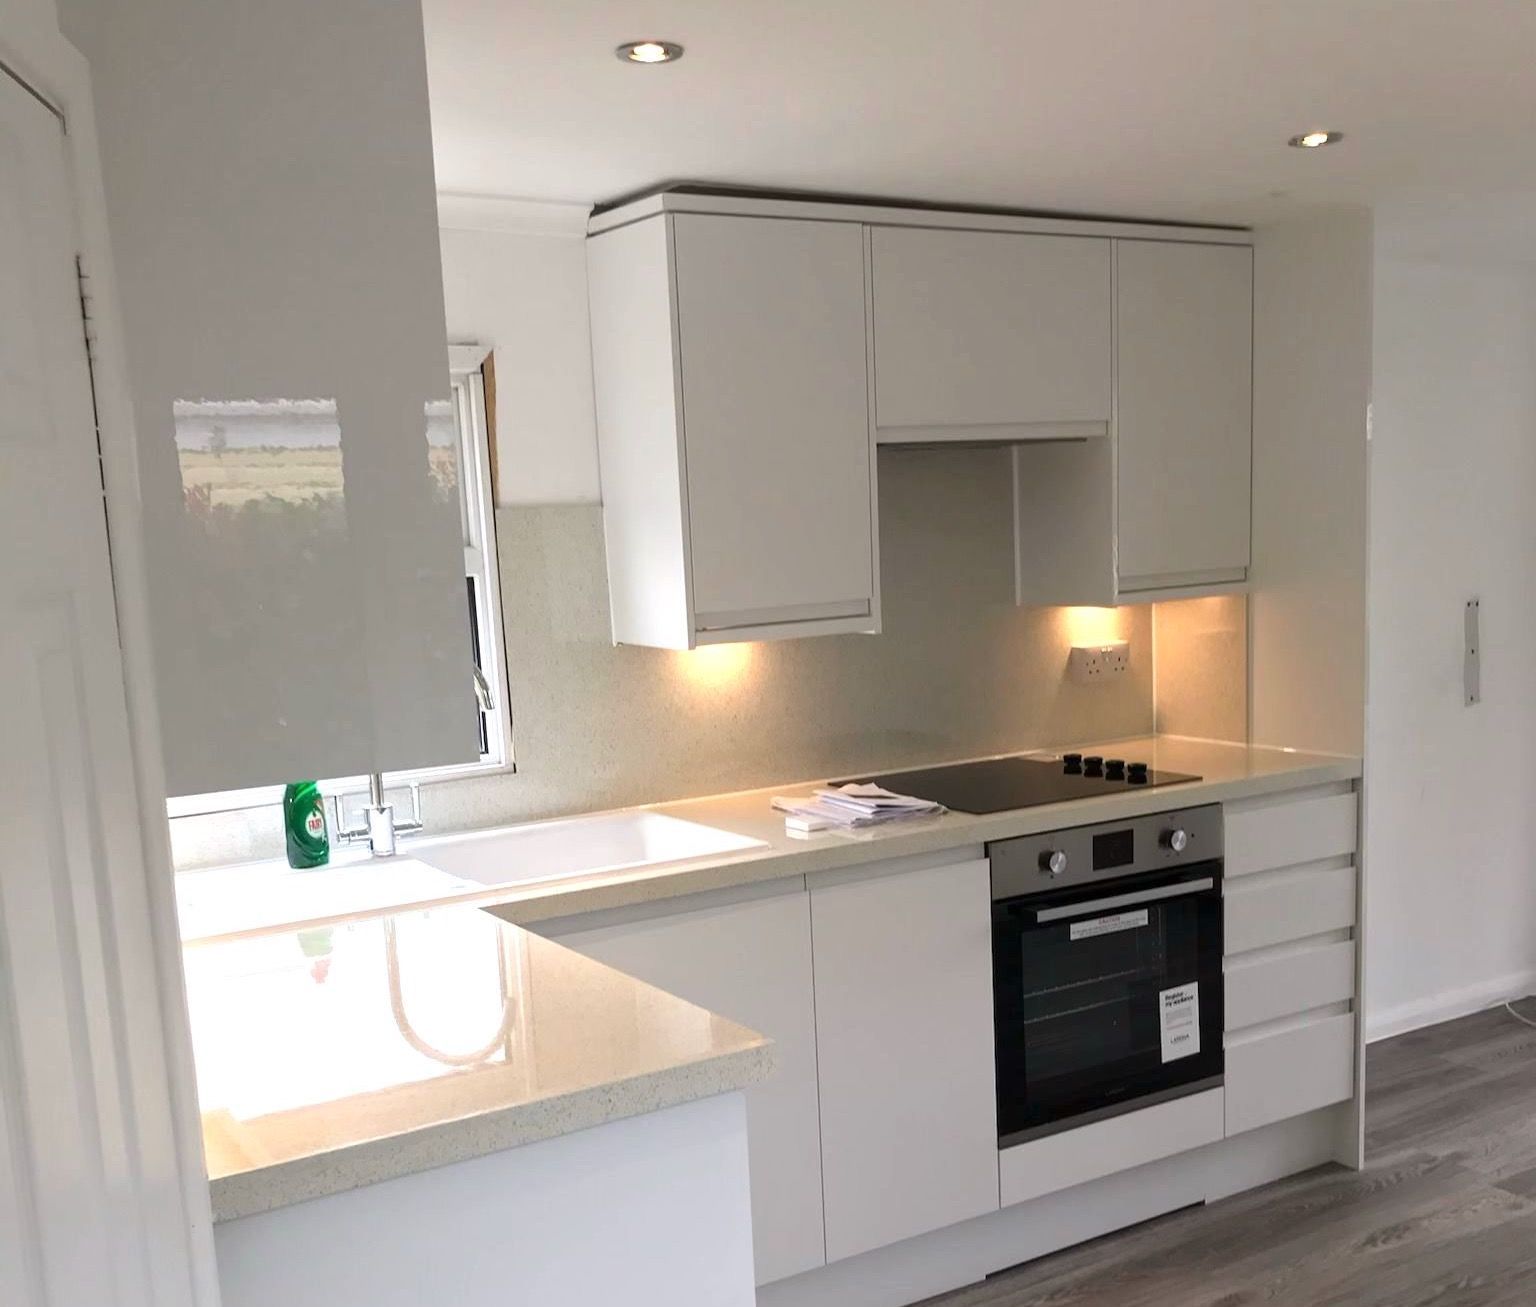 Viking Park Homes Limited install quality park home kitchens across the UK